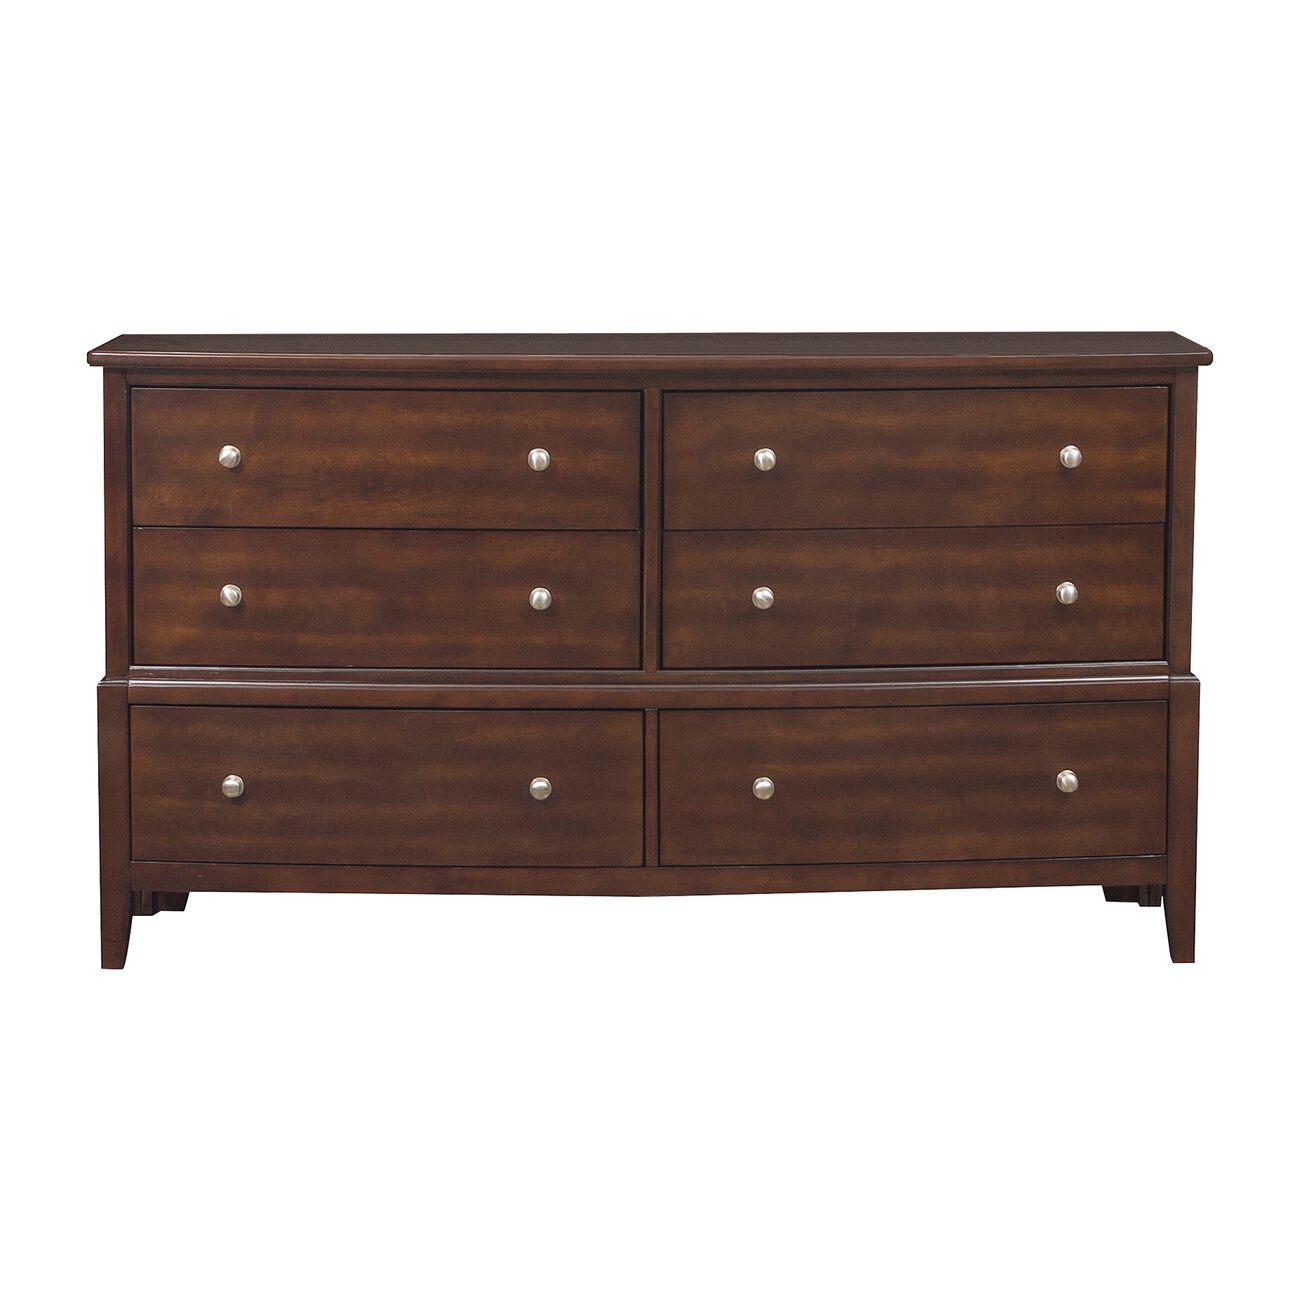 Wooden Dresser with Natural Grain Texture Finish and 6 Drawers, Brown